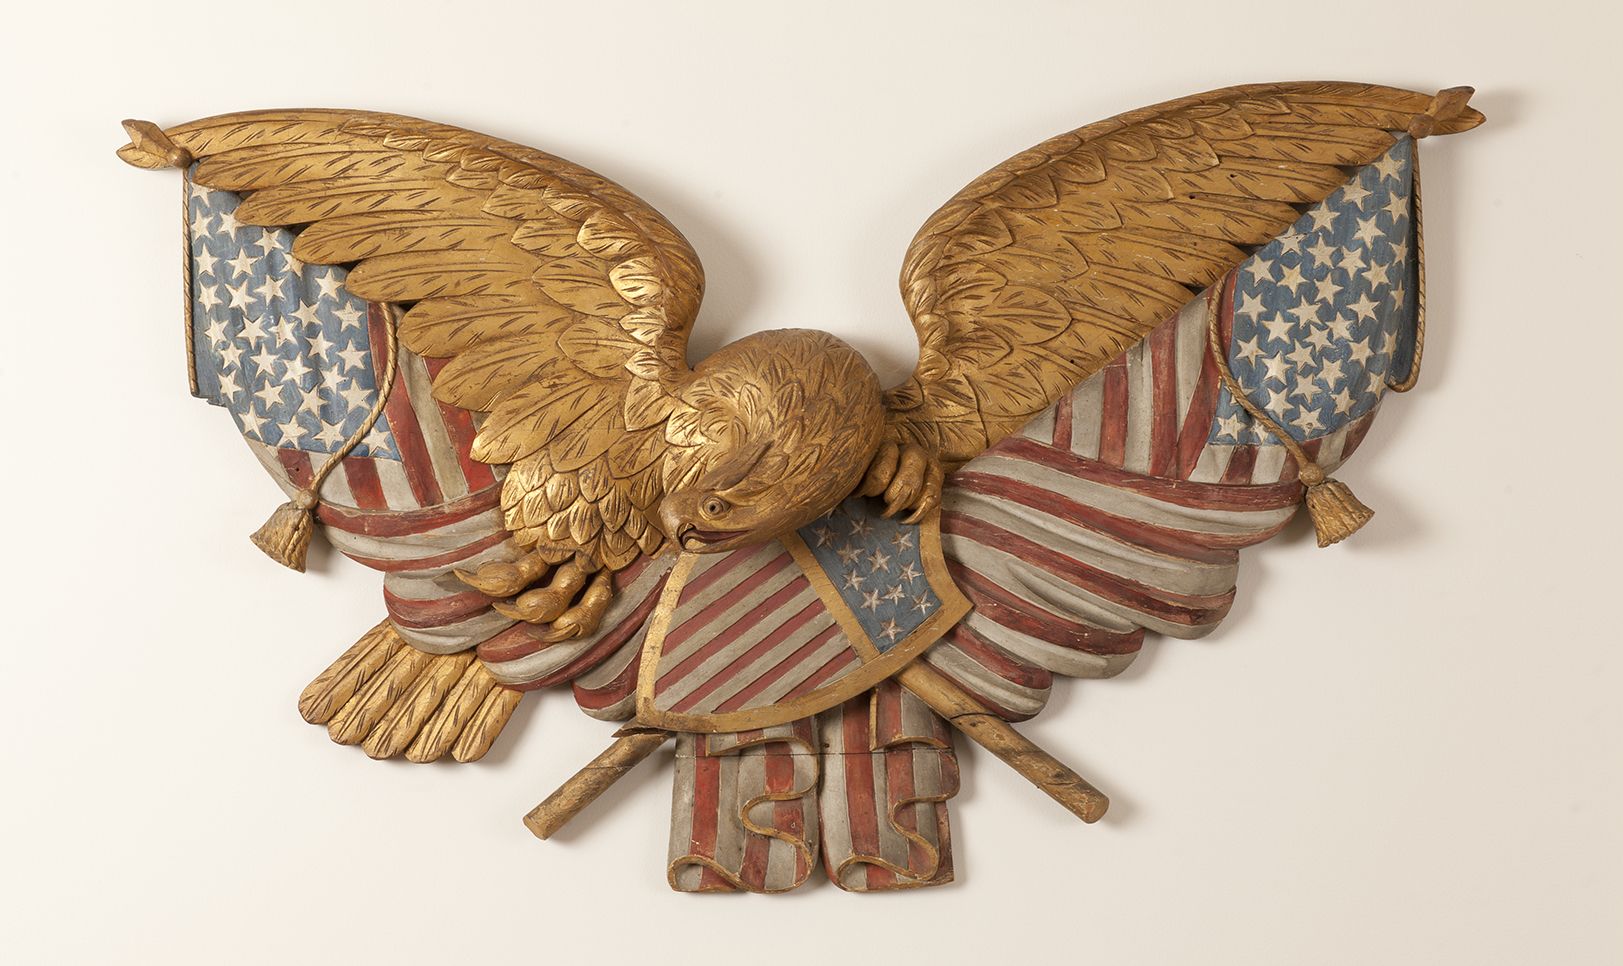 Unidentified Artist, Eagle and Flags Plaque, 1875-1900, white pine, paint, and gilt